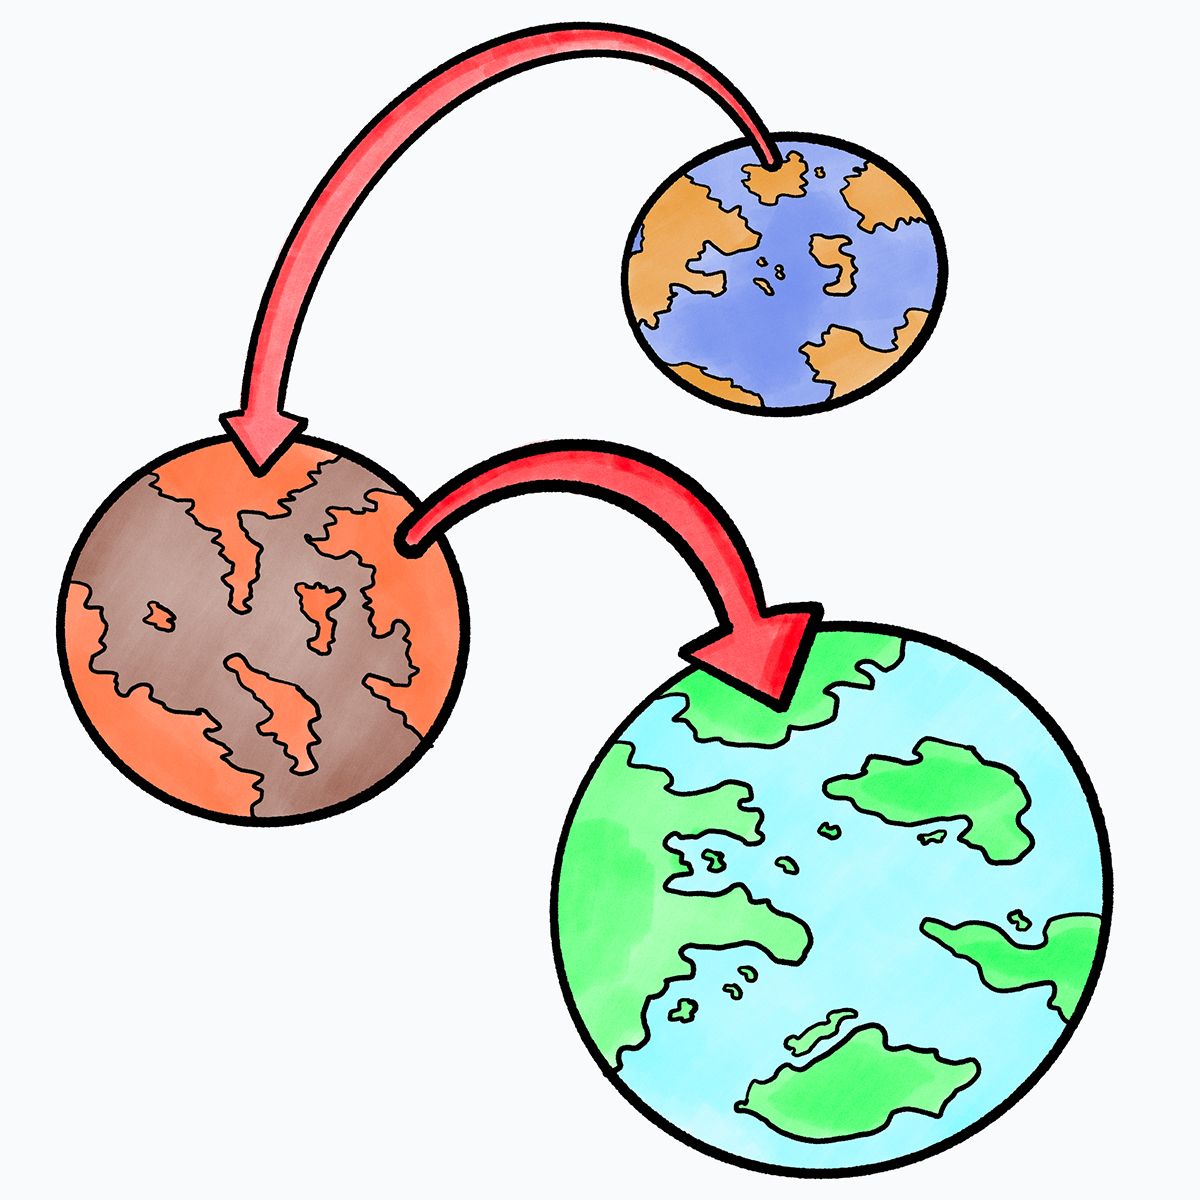 Three worlds, depicted as globes. There is a red arrow jumping from the one furthest back to the next, and then another arrow jumping from that world to the closest one.